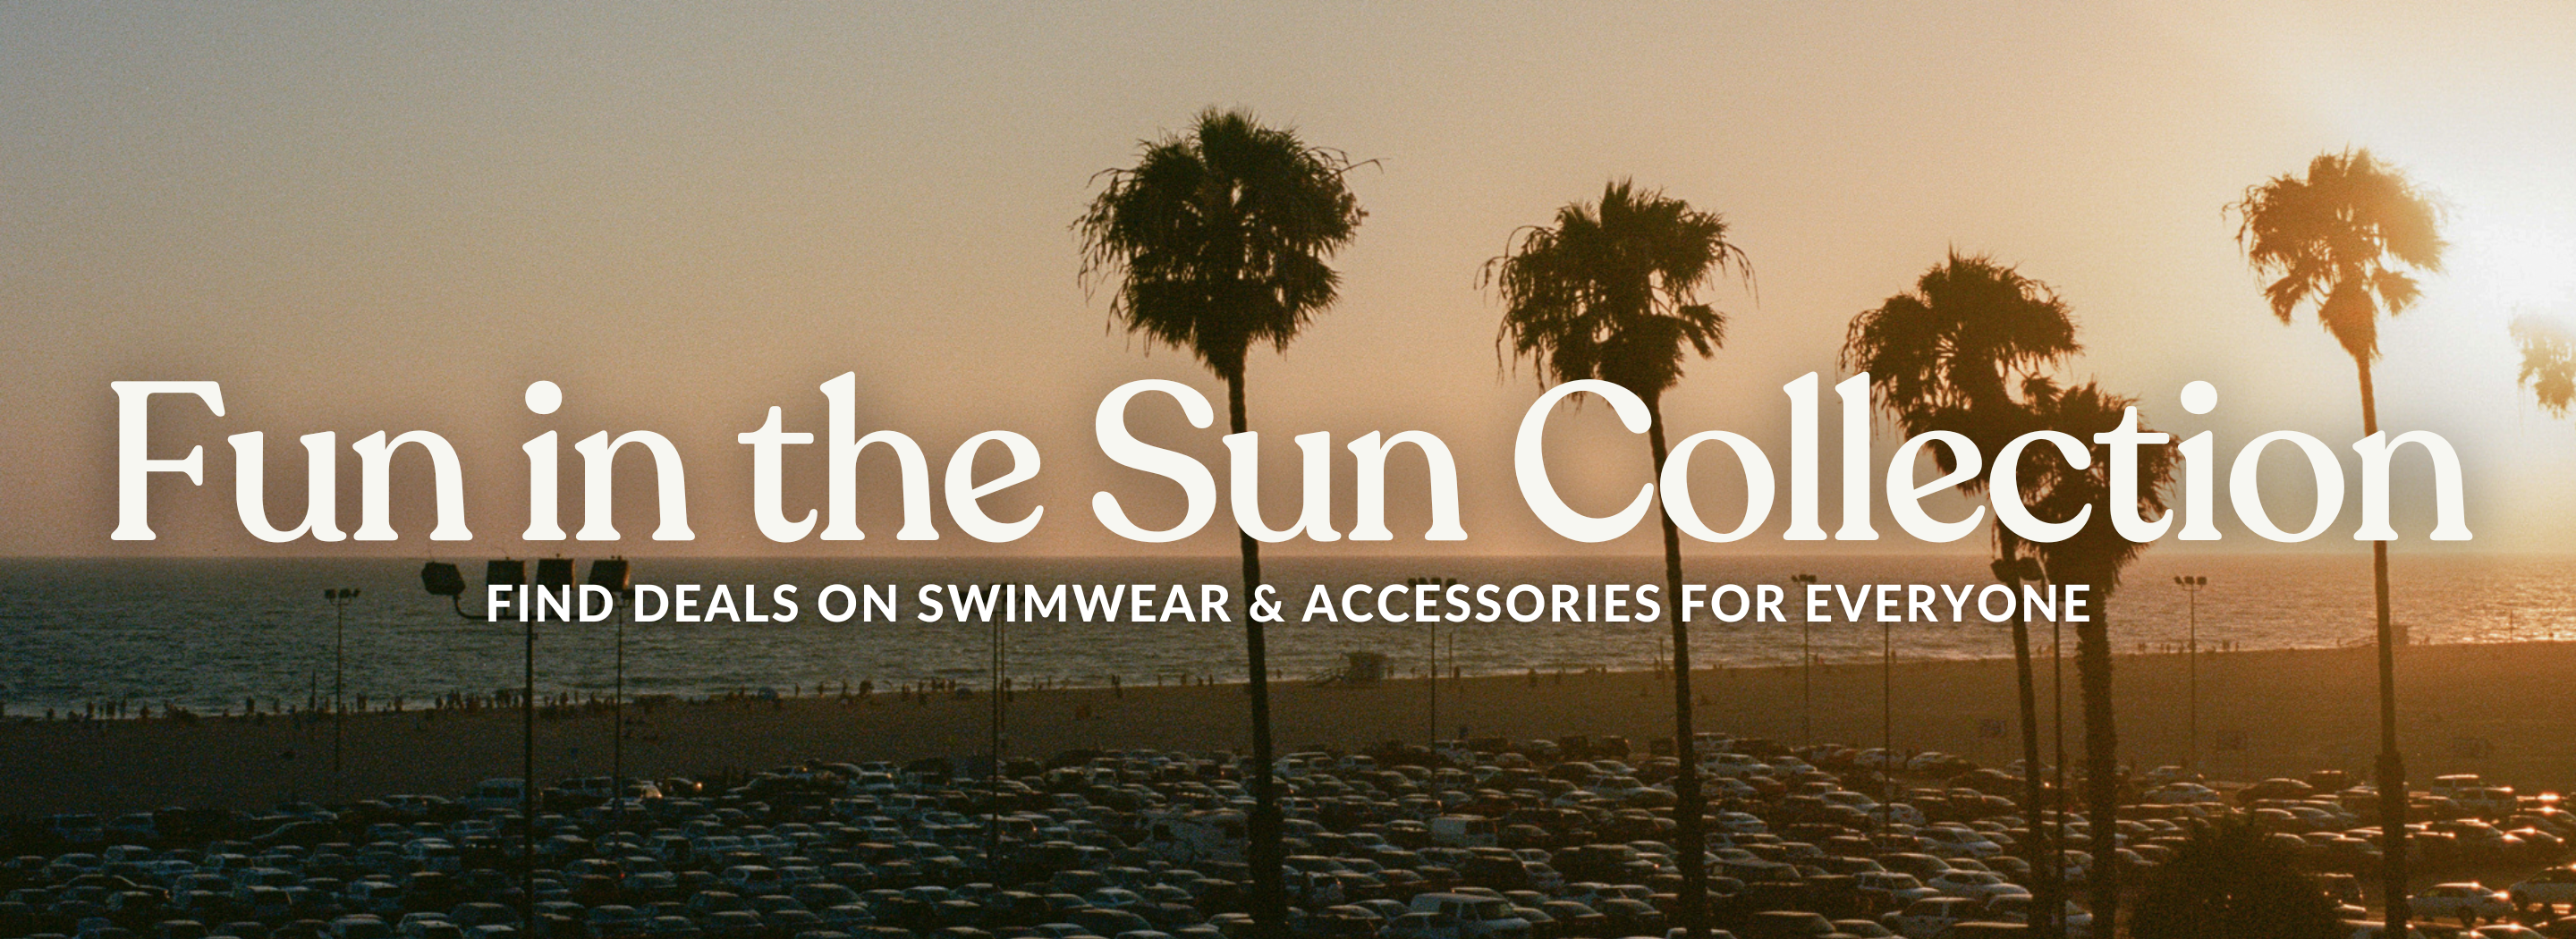 sunset on the beach with palm trees and the caption: "Fun in the Sun Collection. Find Deals on Swimwear & Accessories for Everyone"